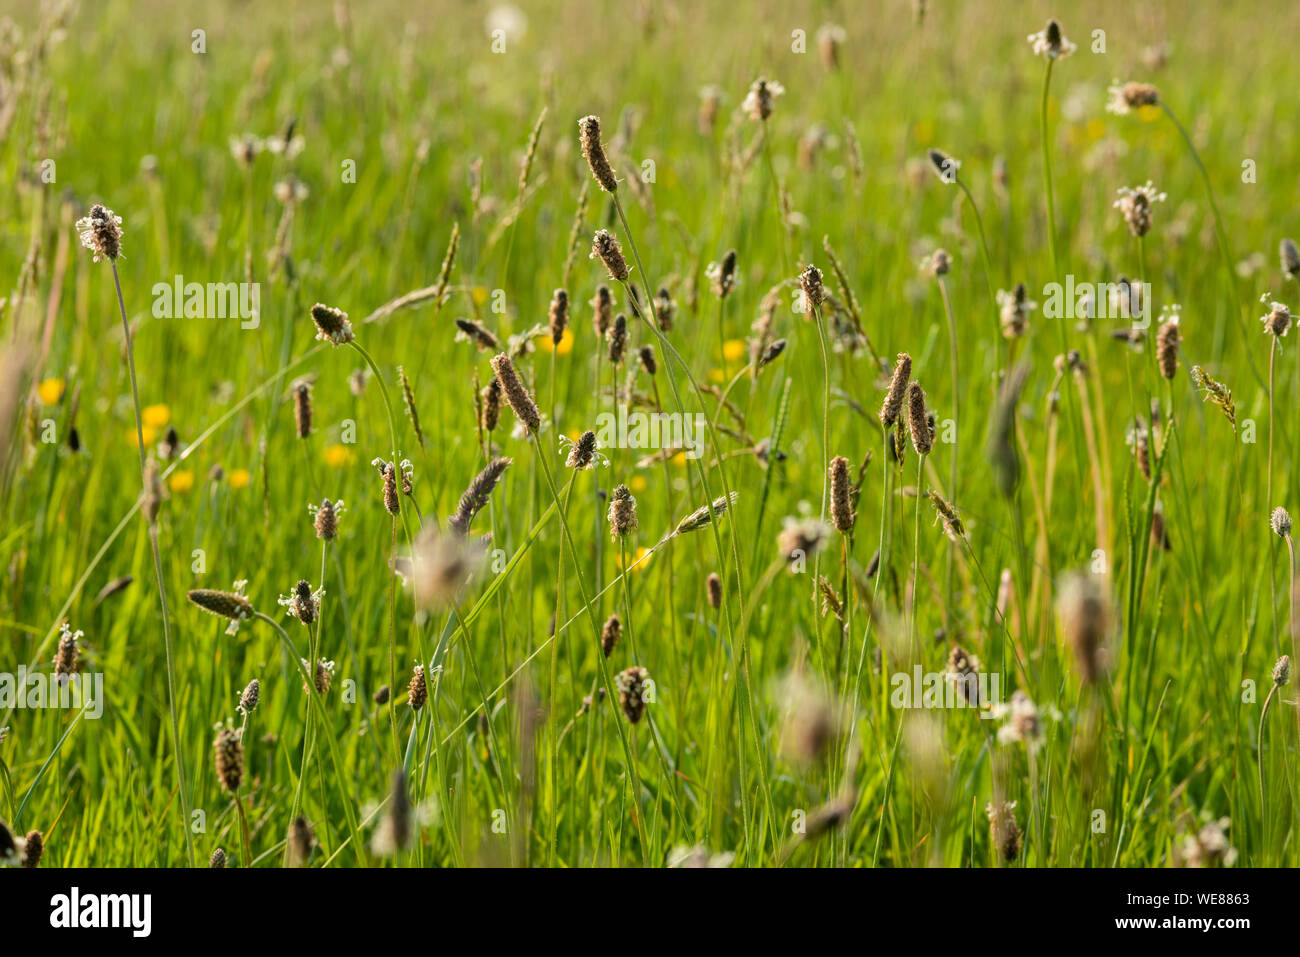 A meadow in spring at Draycott Sleights in the Mendip Hills Area of Outstanding Natural Beauty in Somerset, England. Stock Photo